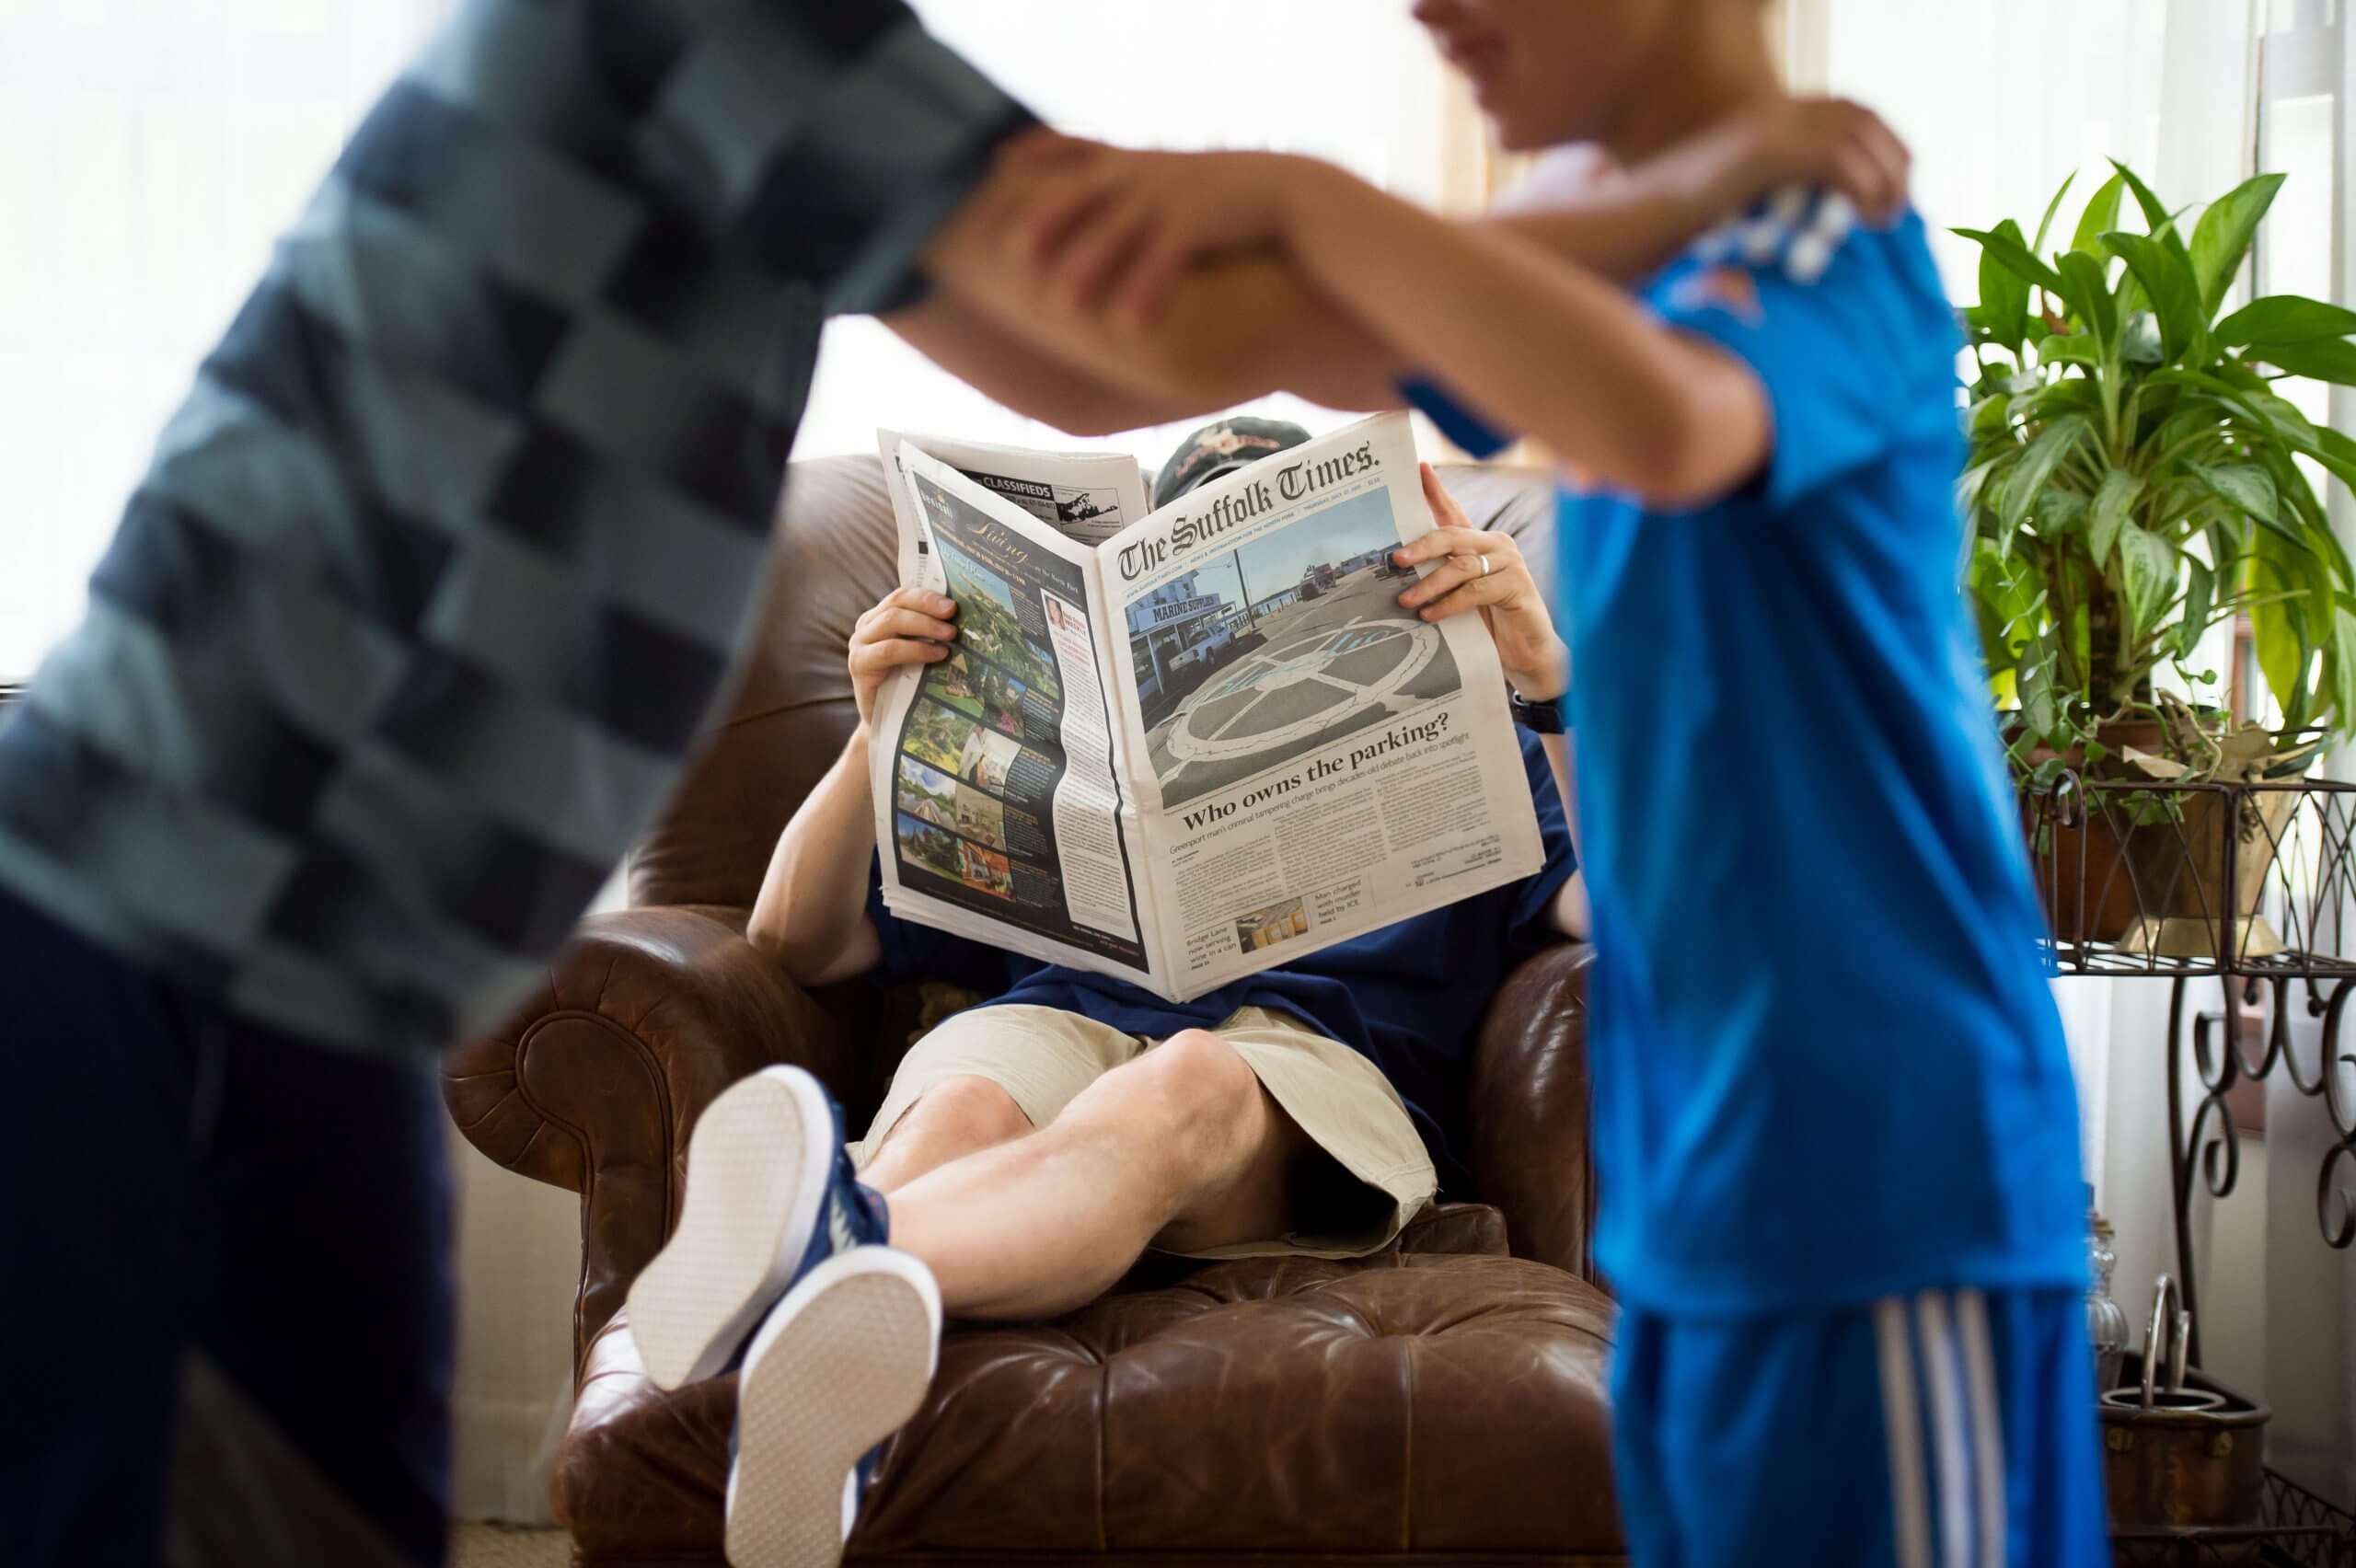 A focused view of a seated man with his feet up reading the newspaper. In front of the man, unfocused view, are two children leaning forward grappling each other.